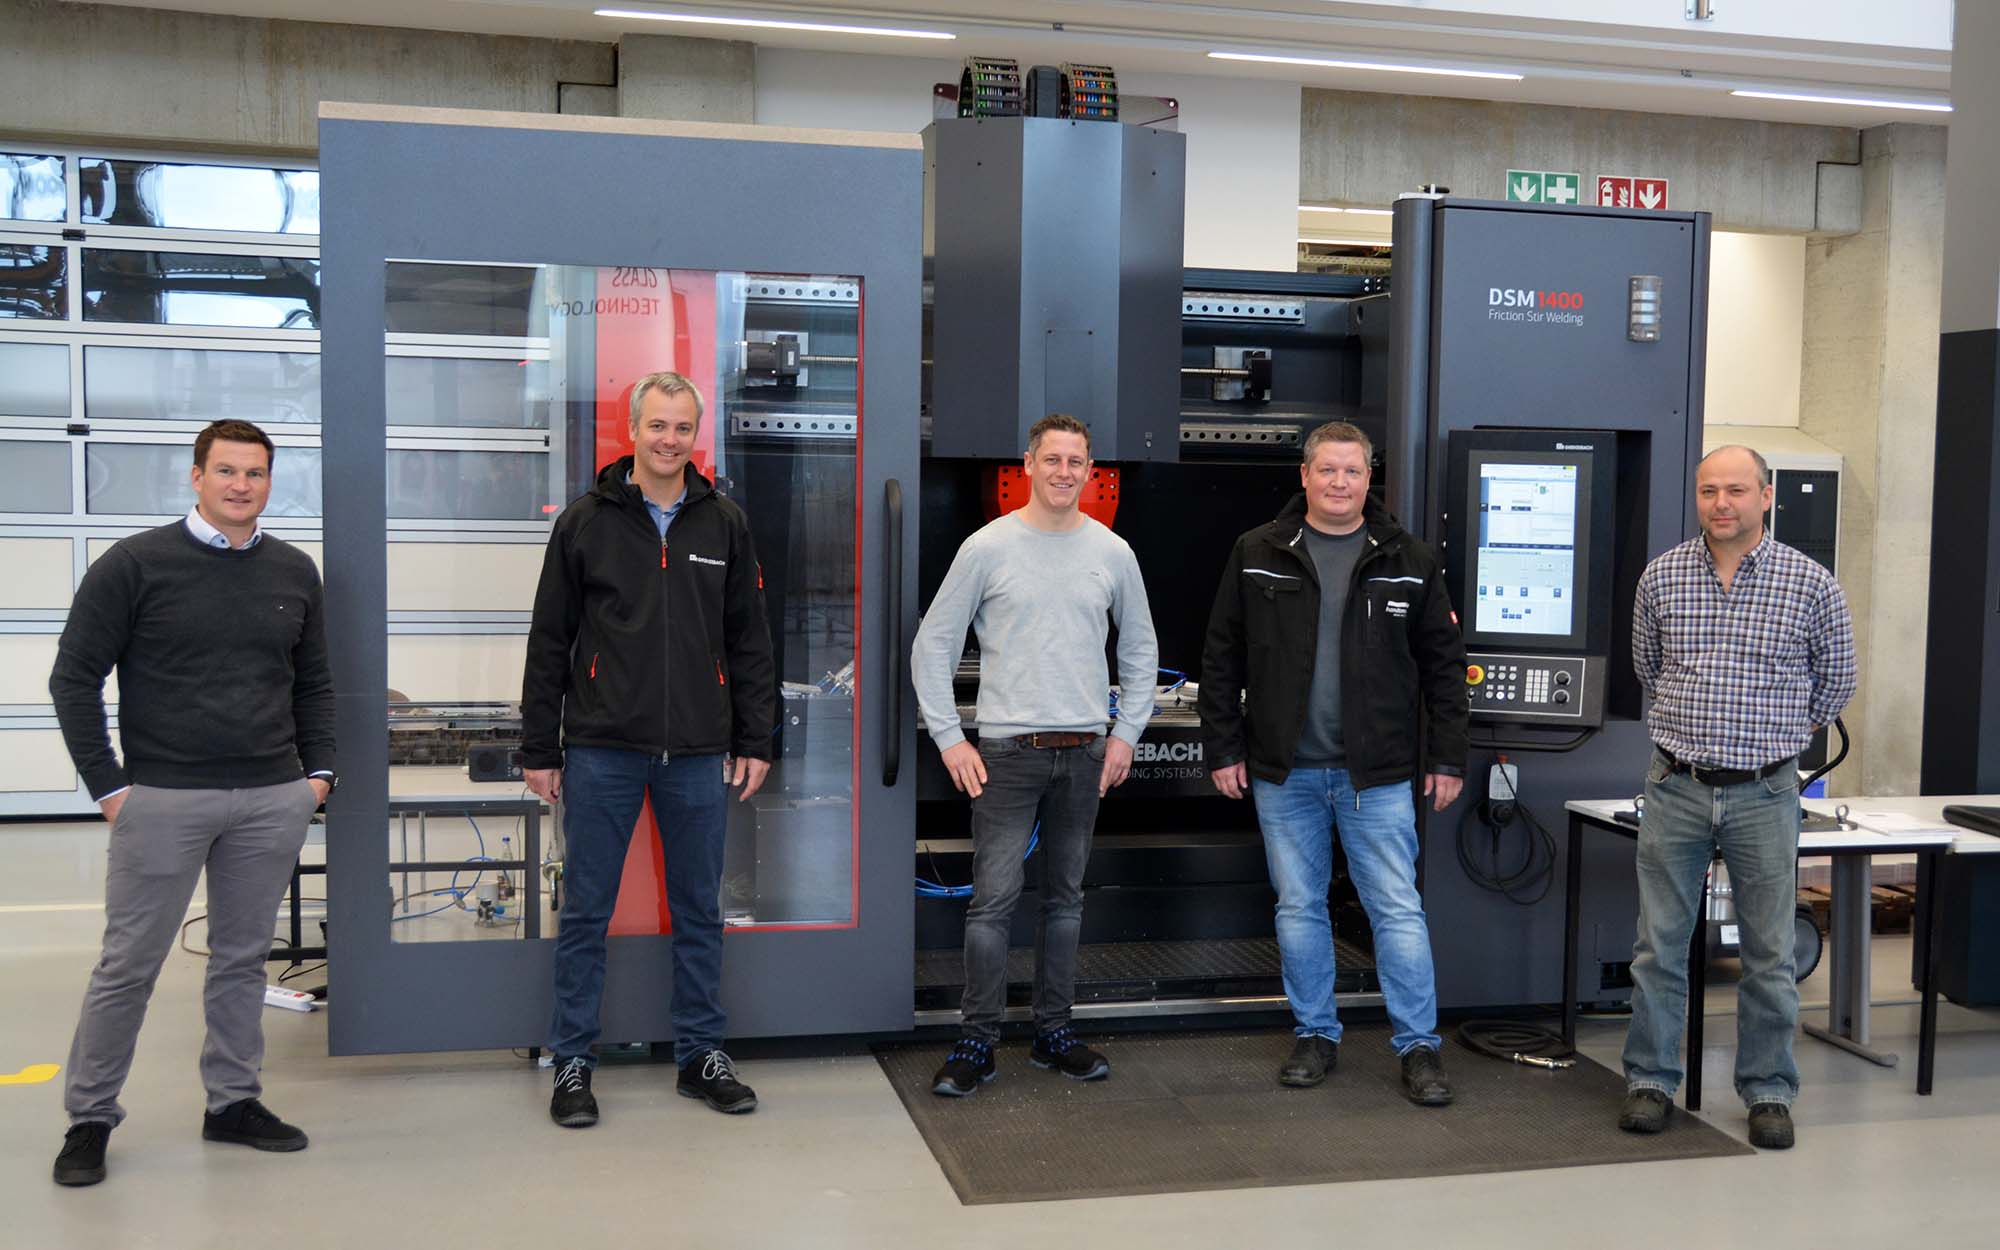 From summer 2022 on, Handtmann will start their own serial production of the component using a Friction Stir Welding gantry machine from Grenzebach.